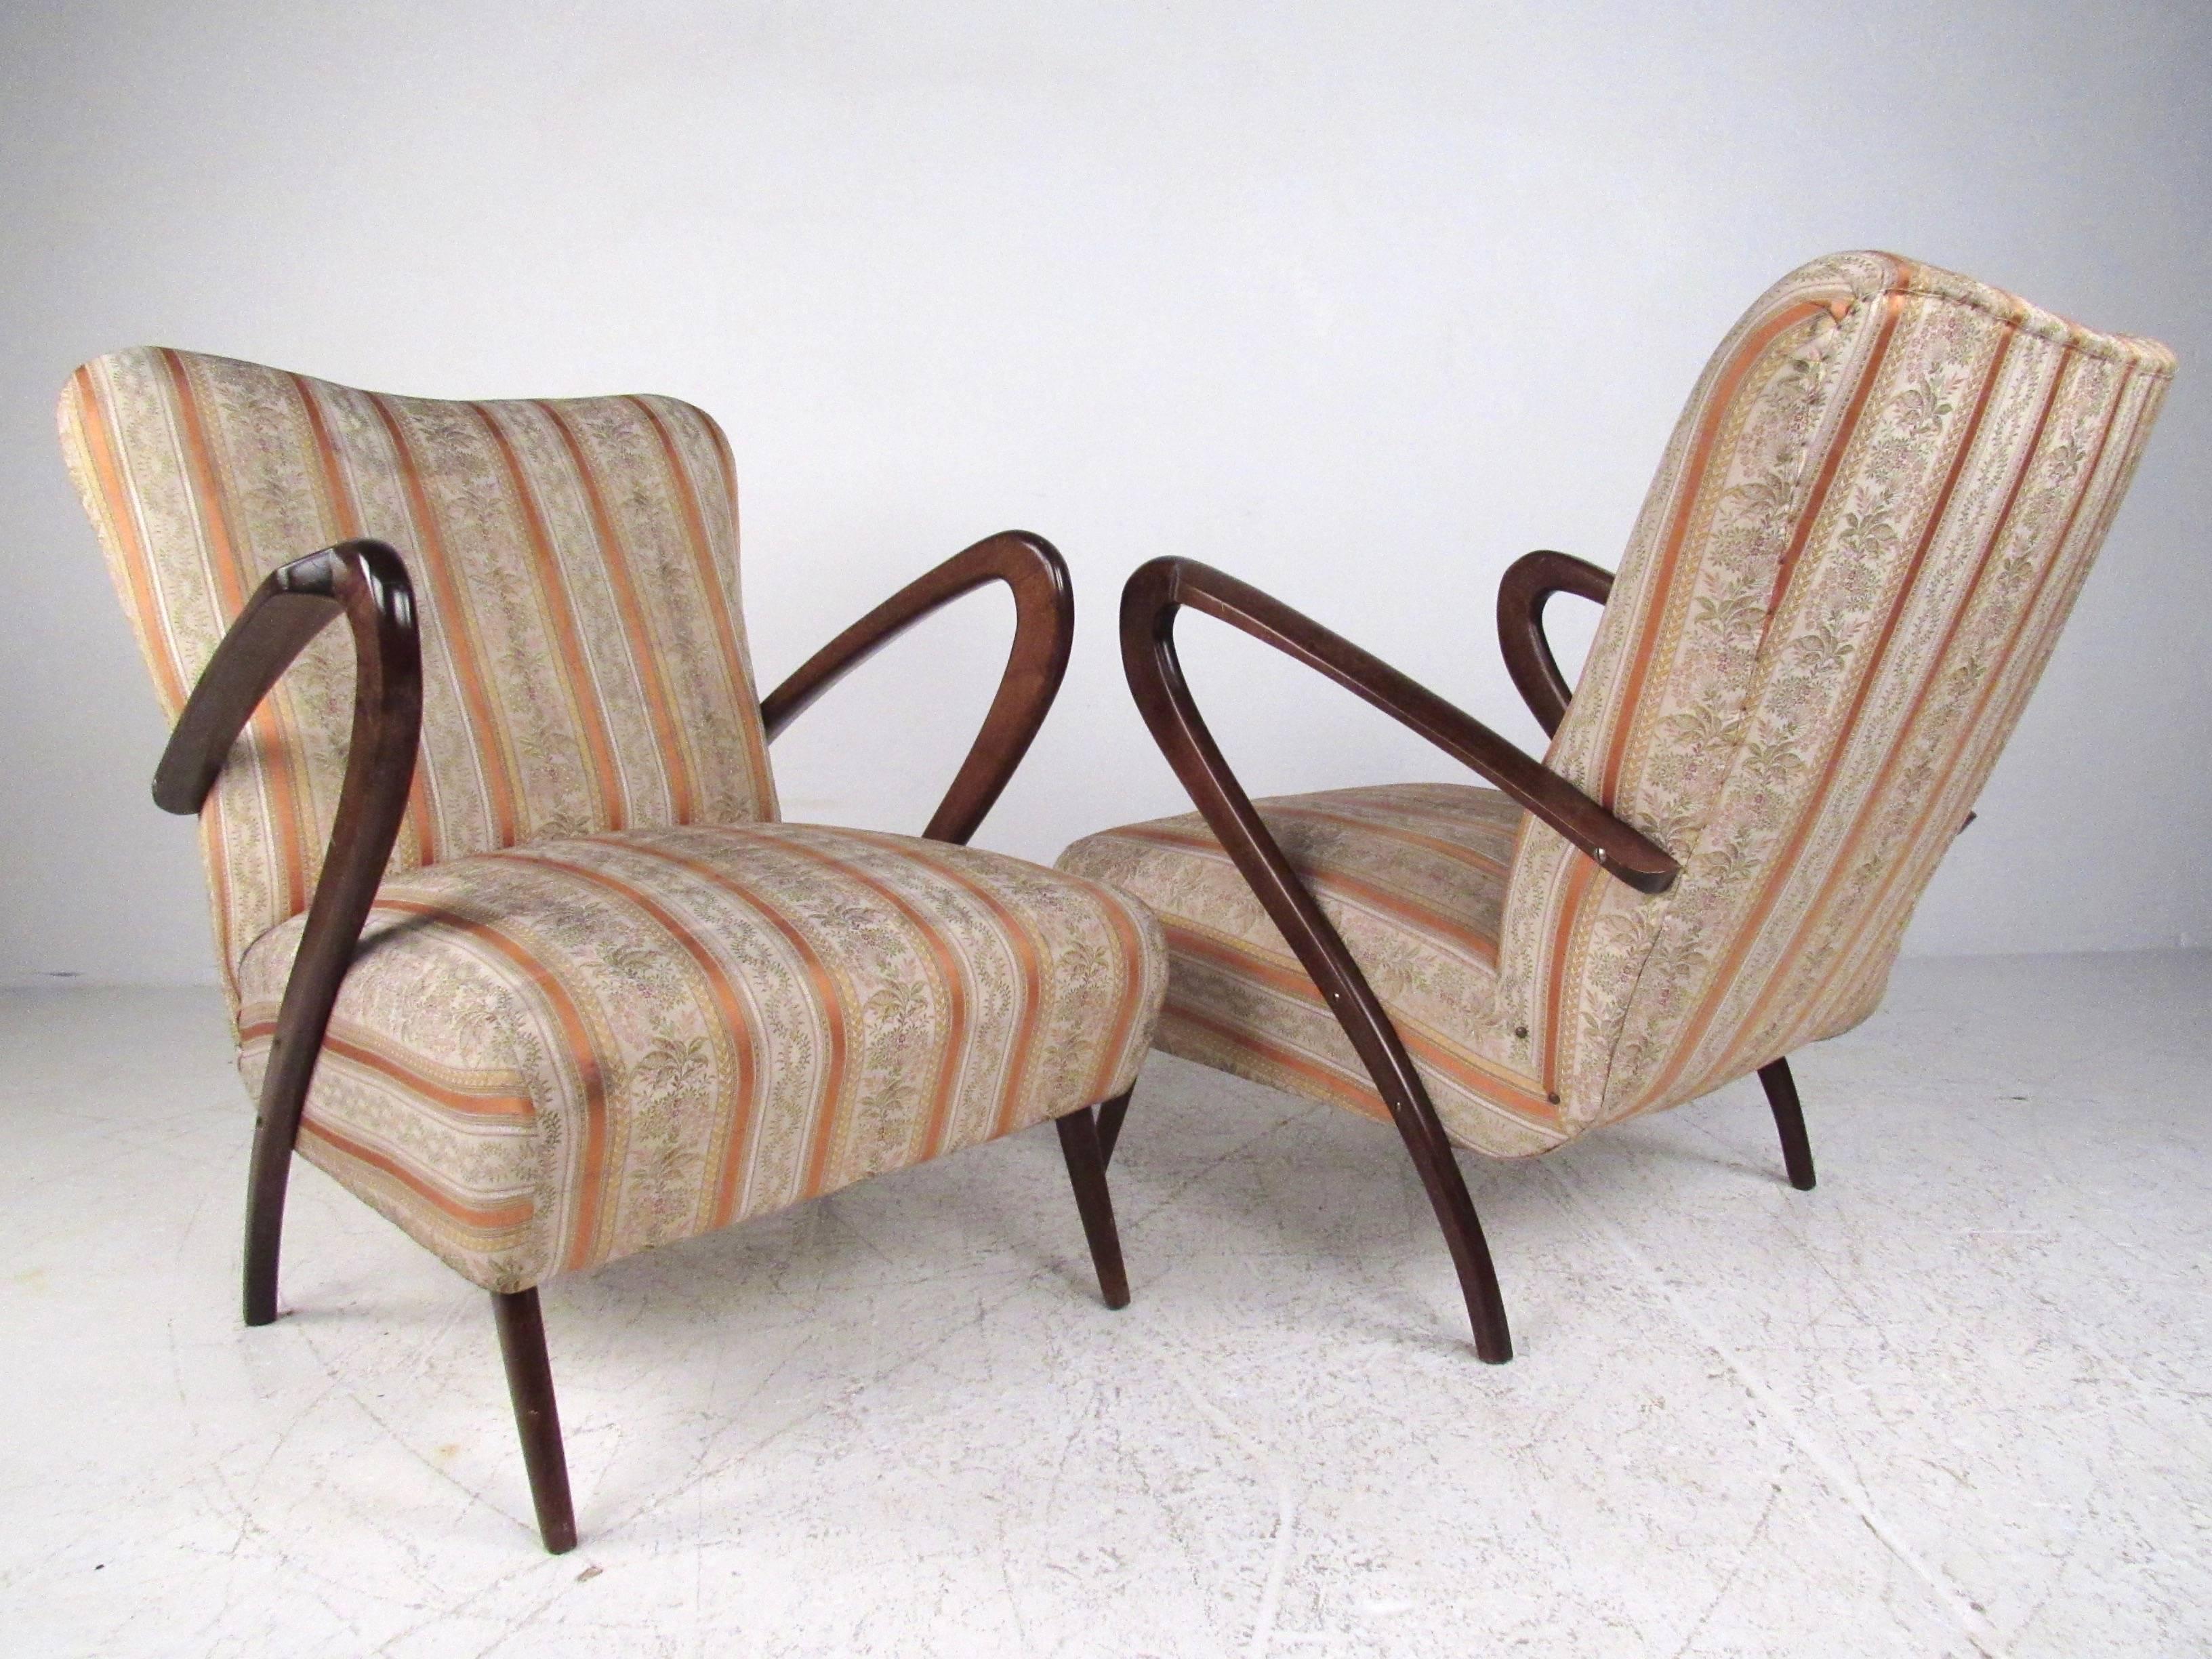 This beautiful pair of Mid-Century Italian lounge chairs features stunning sculpted armrests, with a lovely patinated finish. Floral motif patterned fabric adds to the vintage appeal of the pair. Matching settee also available, please confirm item